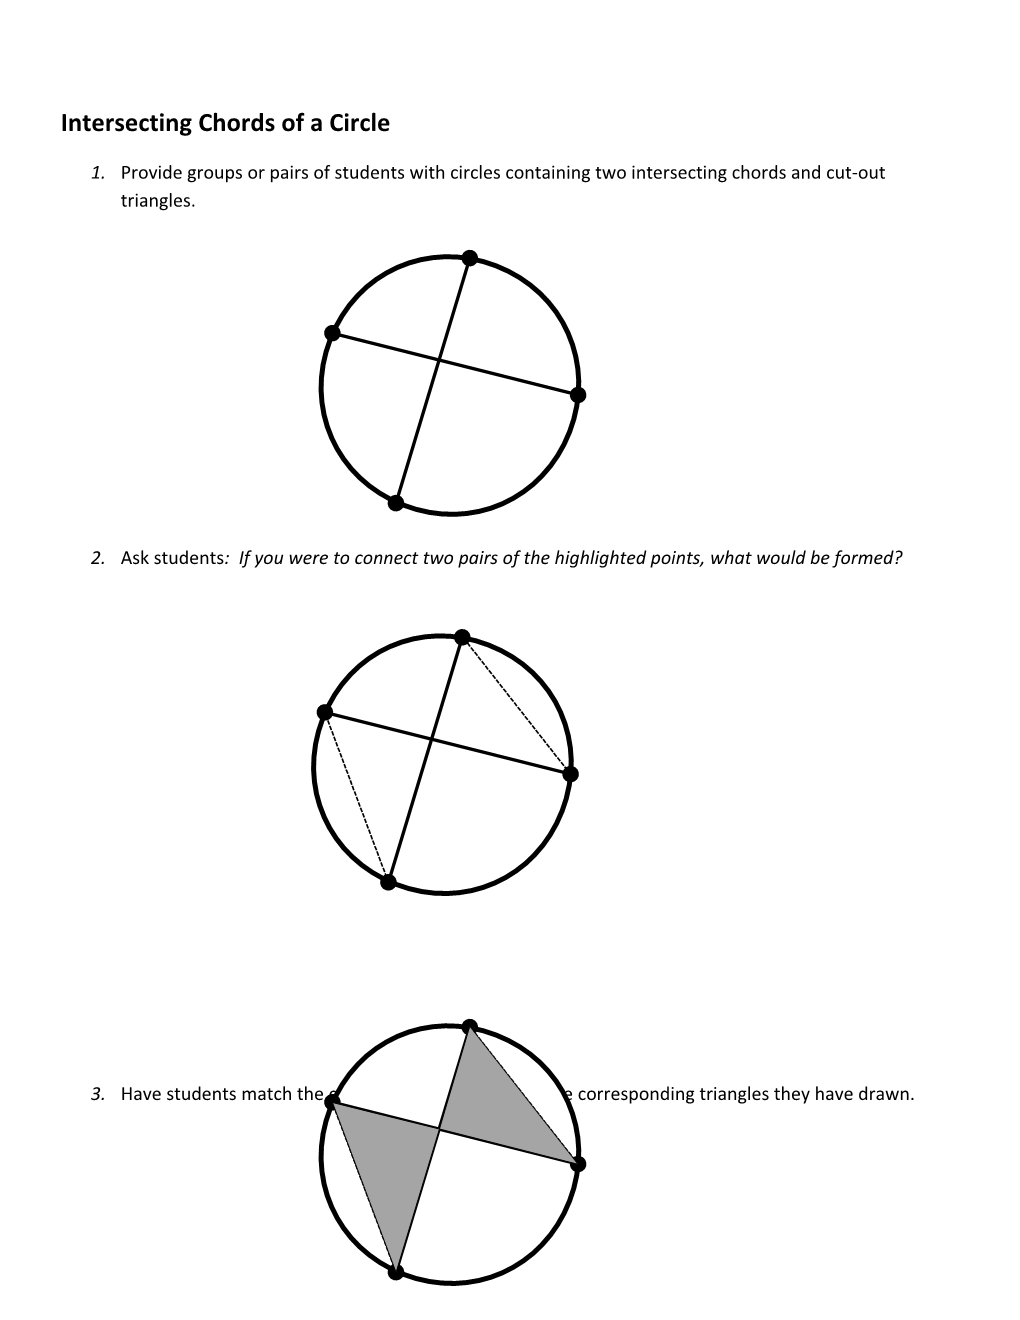 Intersecting Chords of a Circle